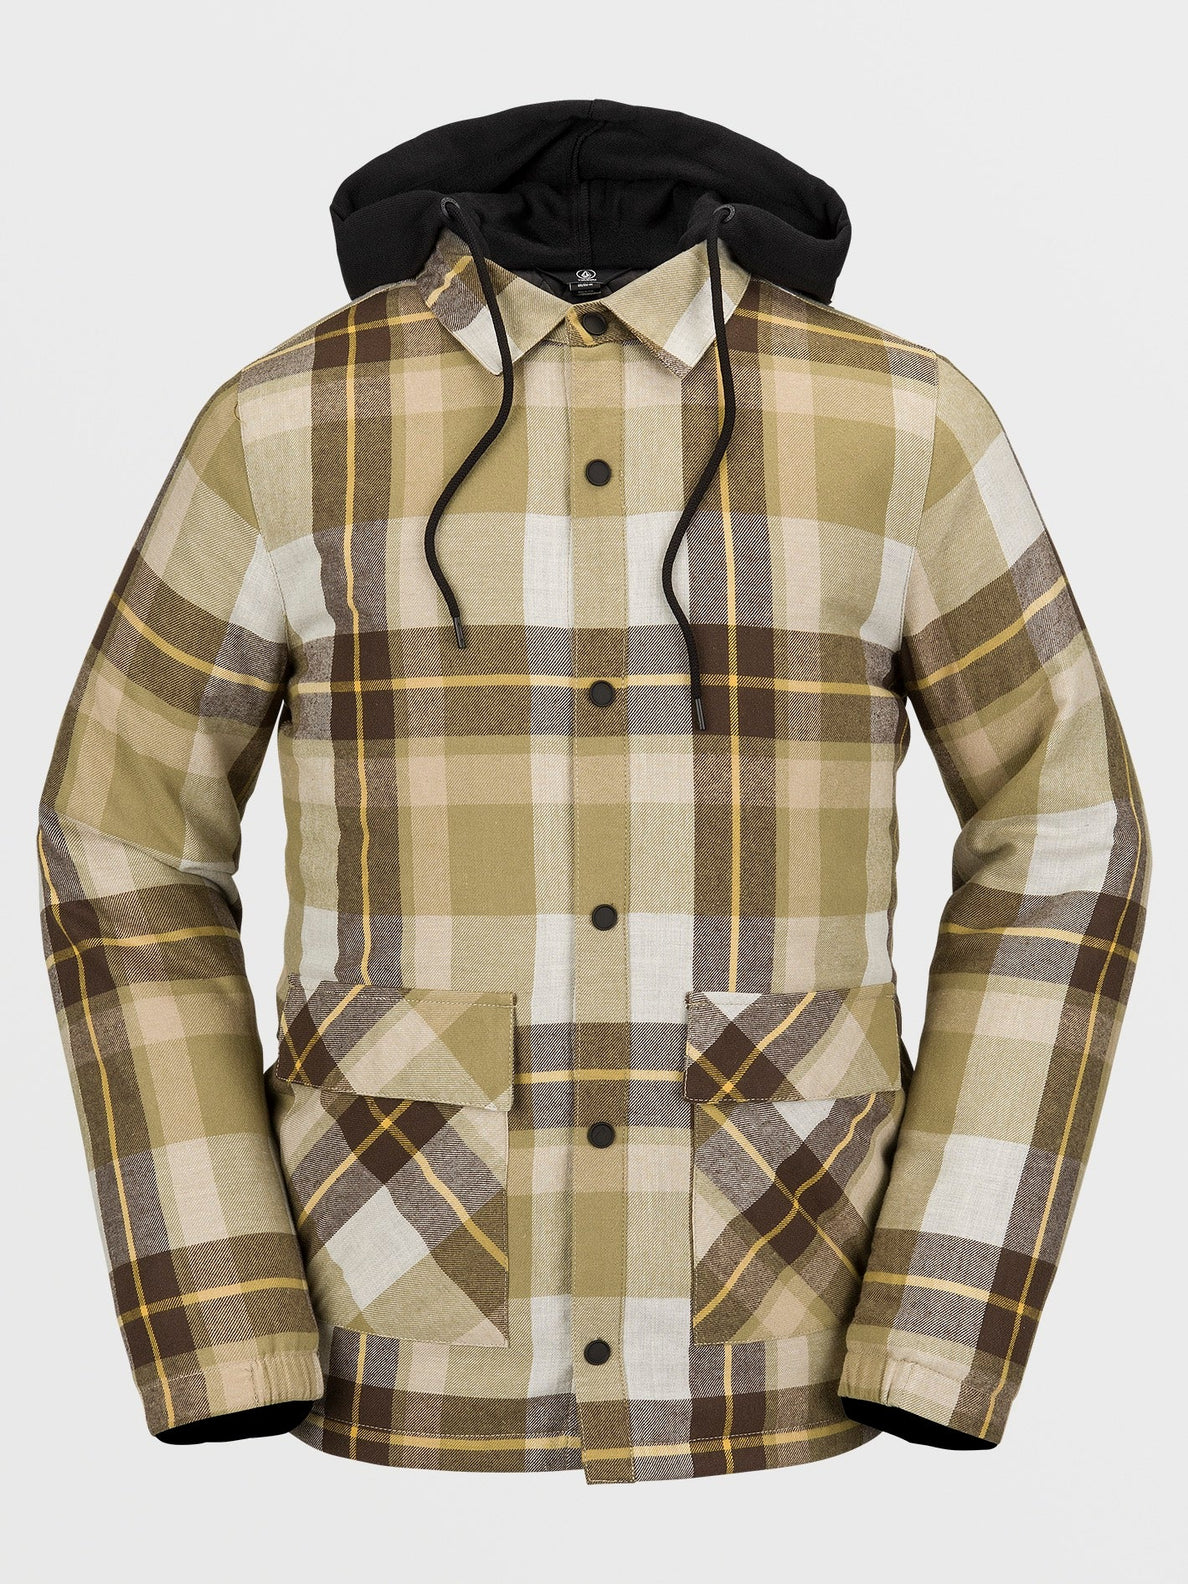 Insulated Riding Flannel Jacket - KHAKIEST (G1652401_KST) [F]